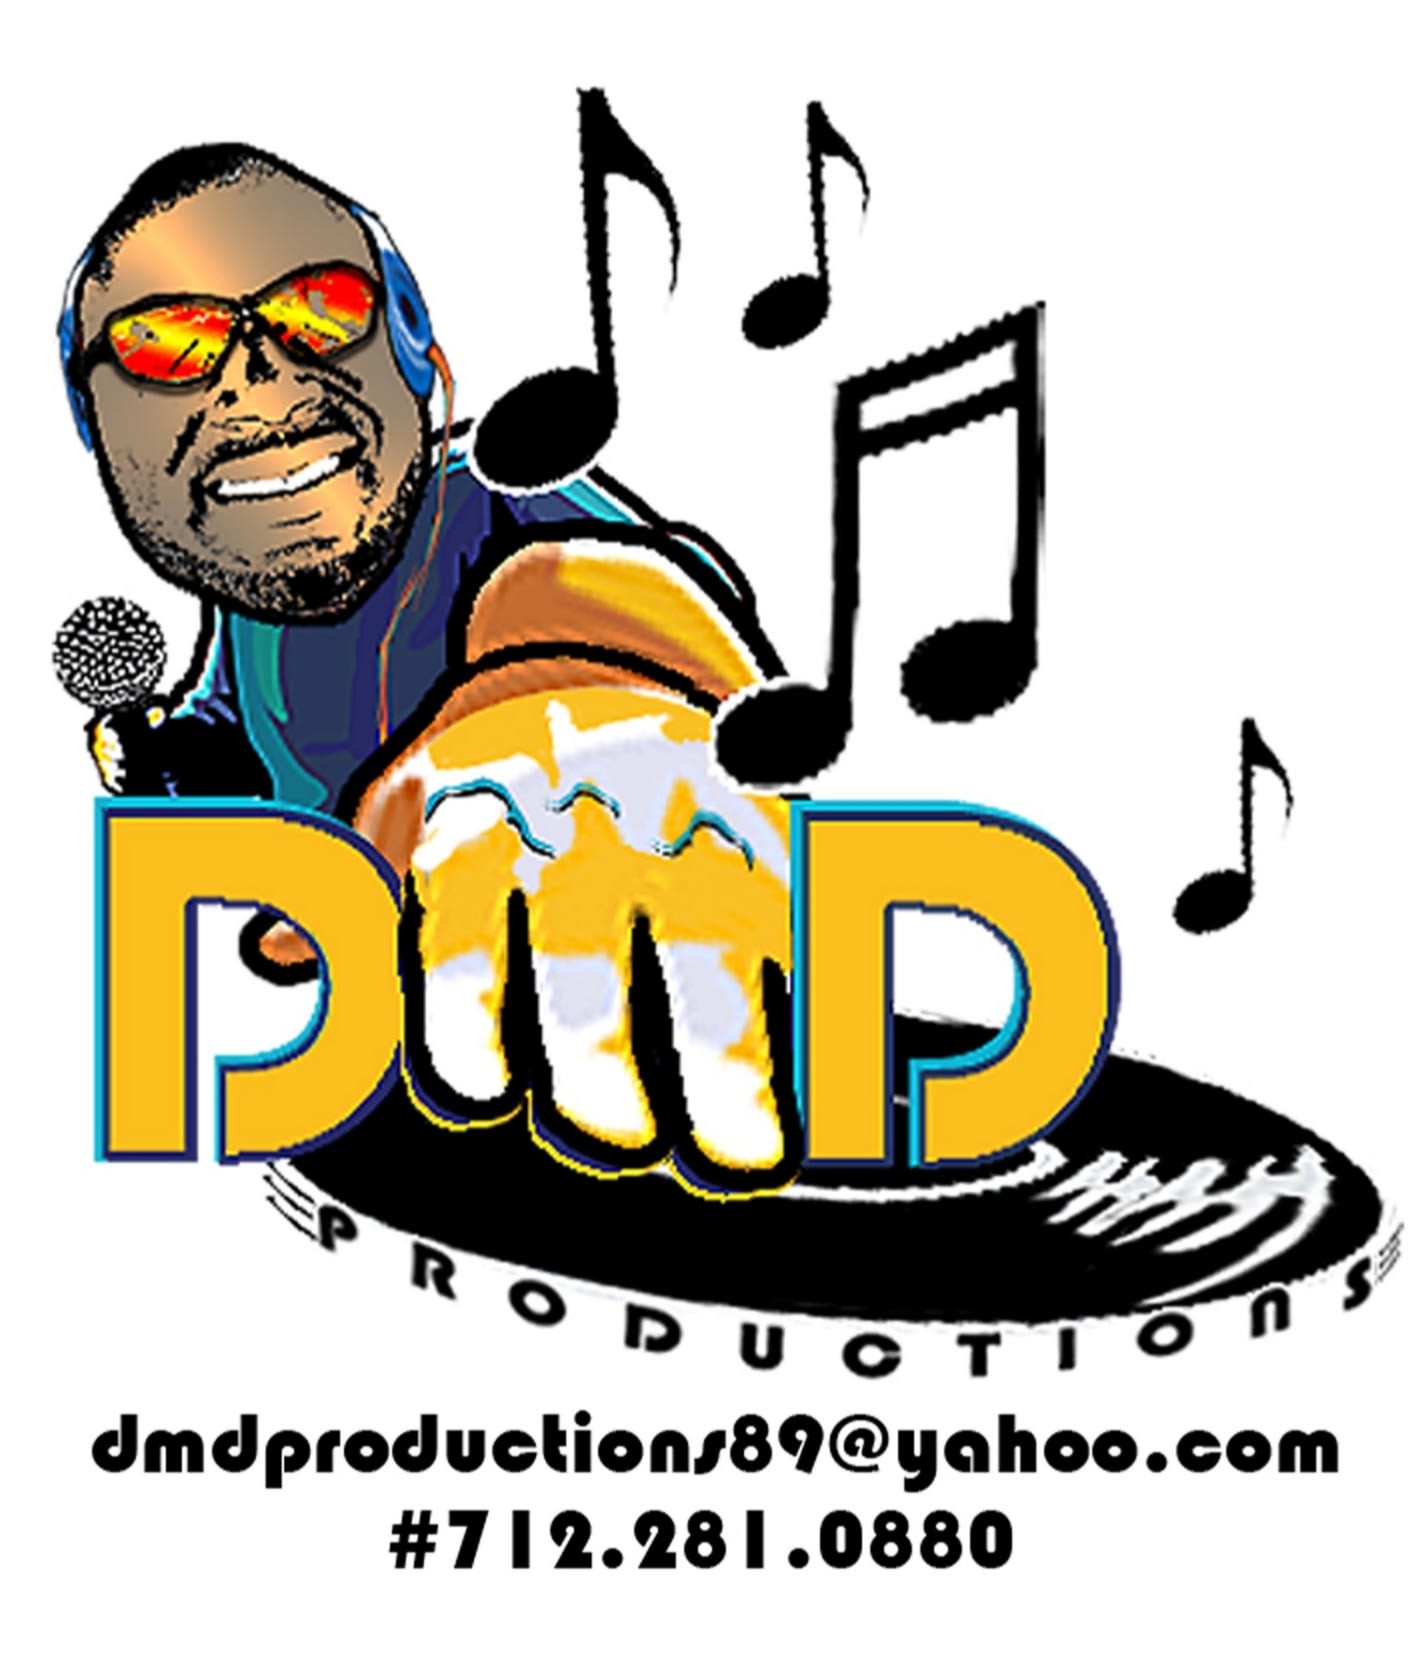 DMD Productions89